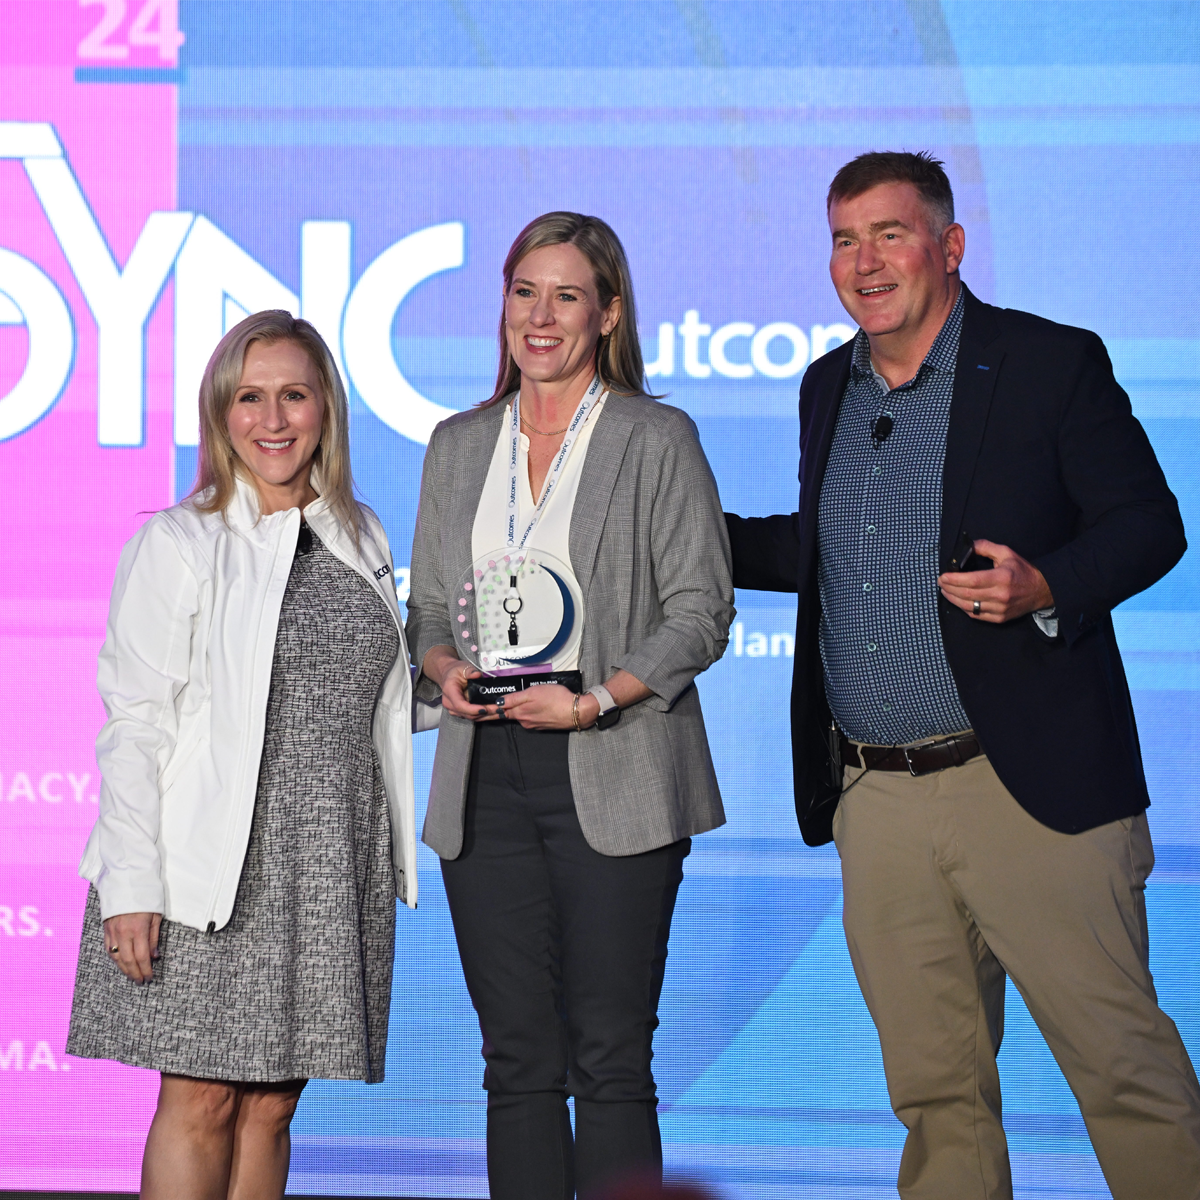 Outcomes Honors Achievements in Pharmacy Operations and Clinical Excellence at SYNC